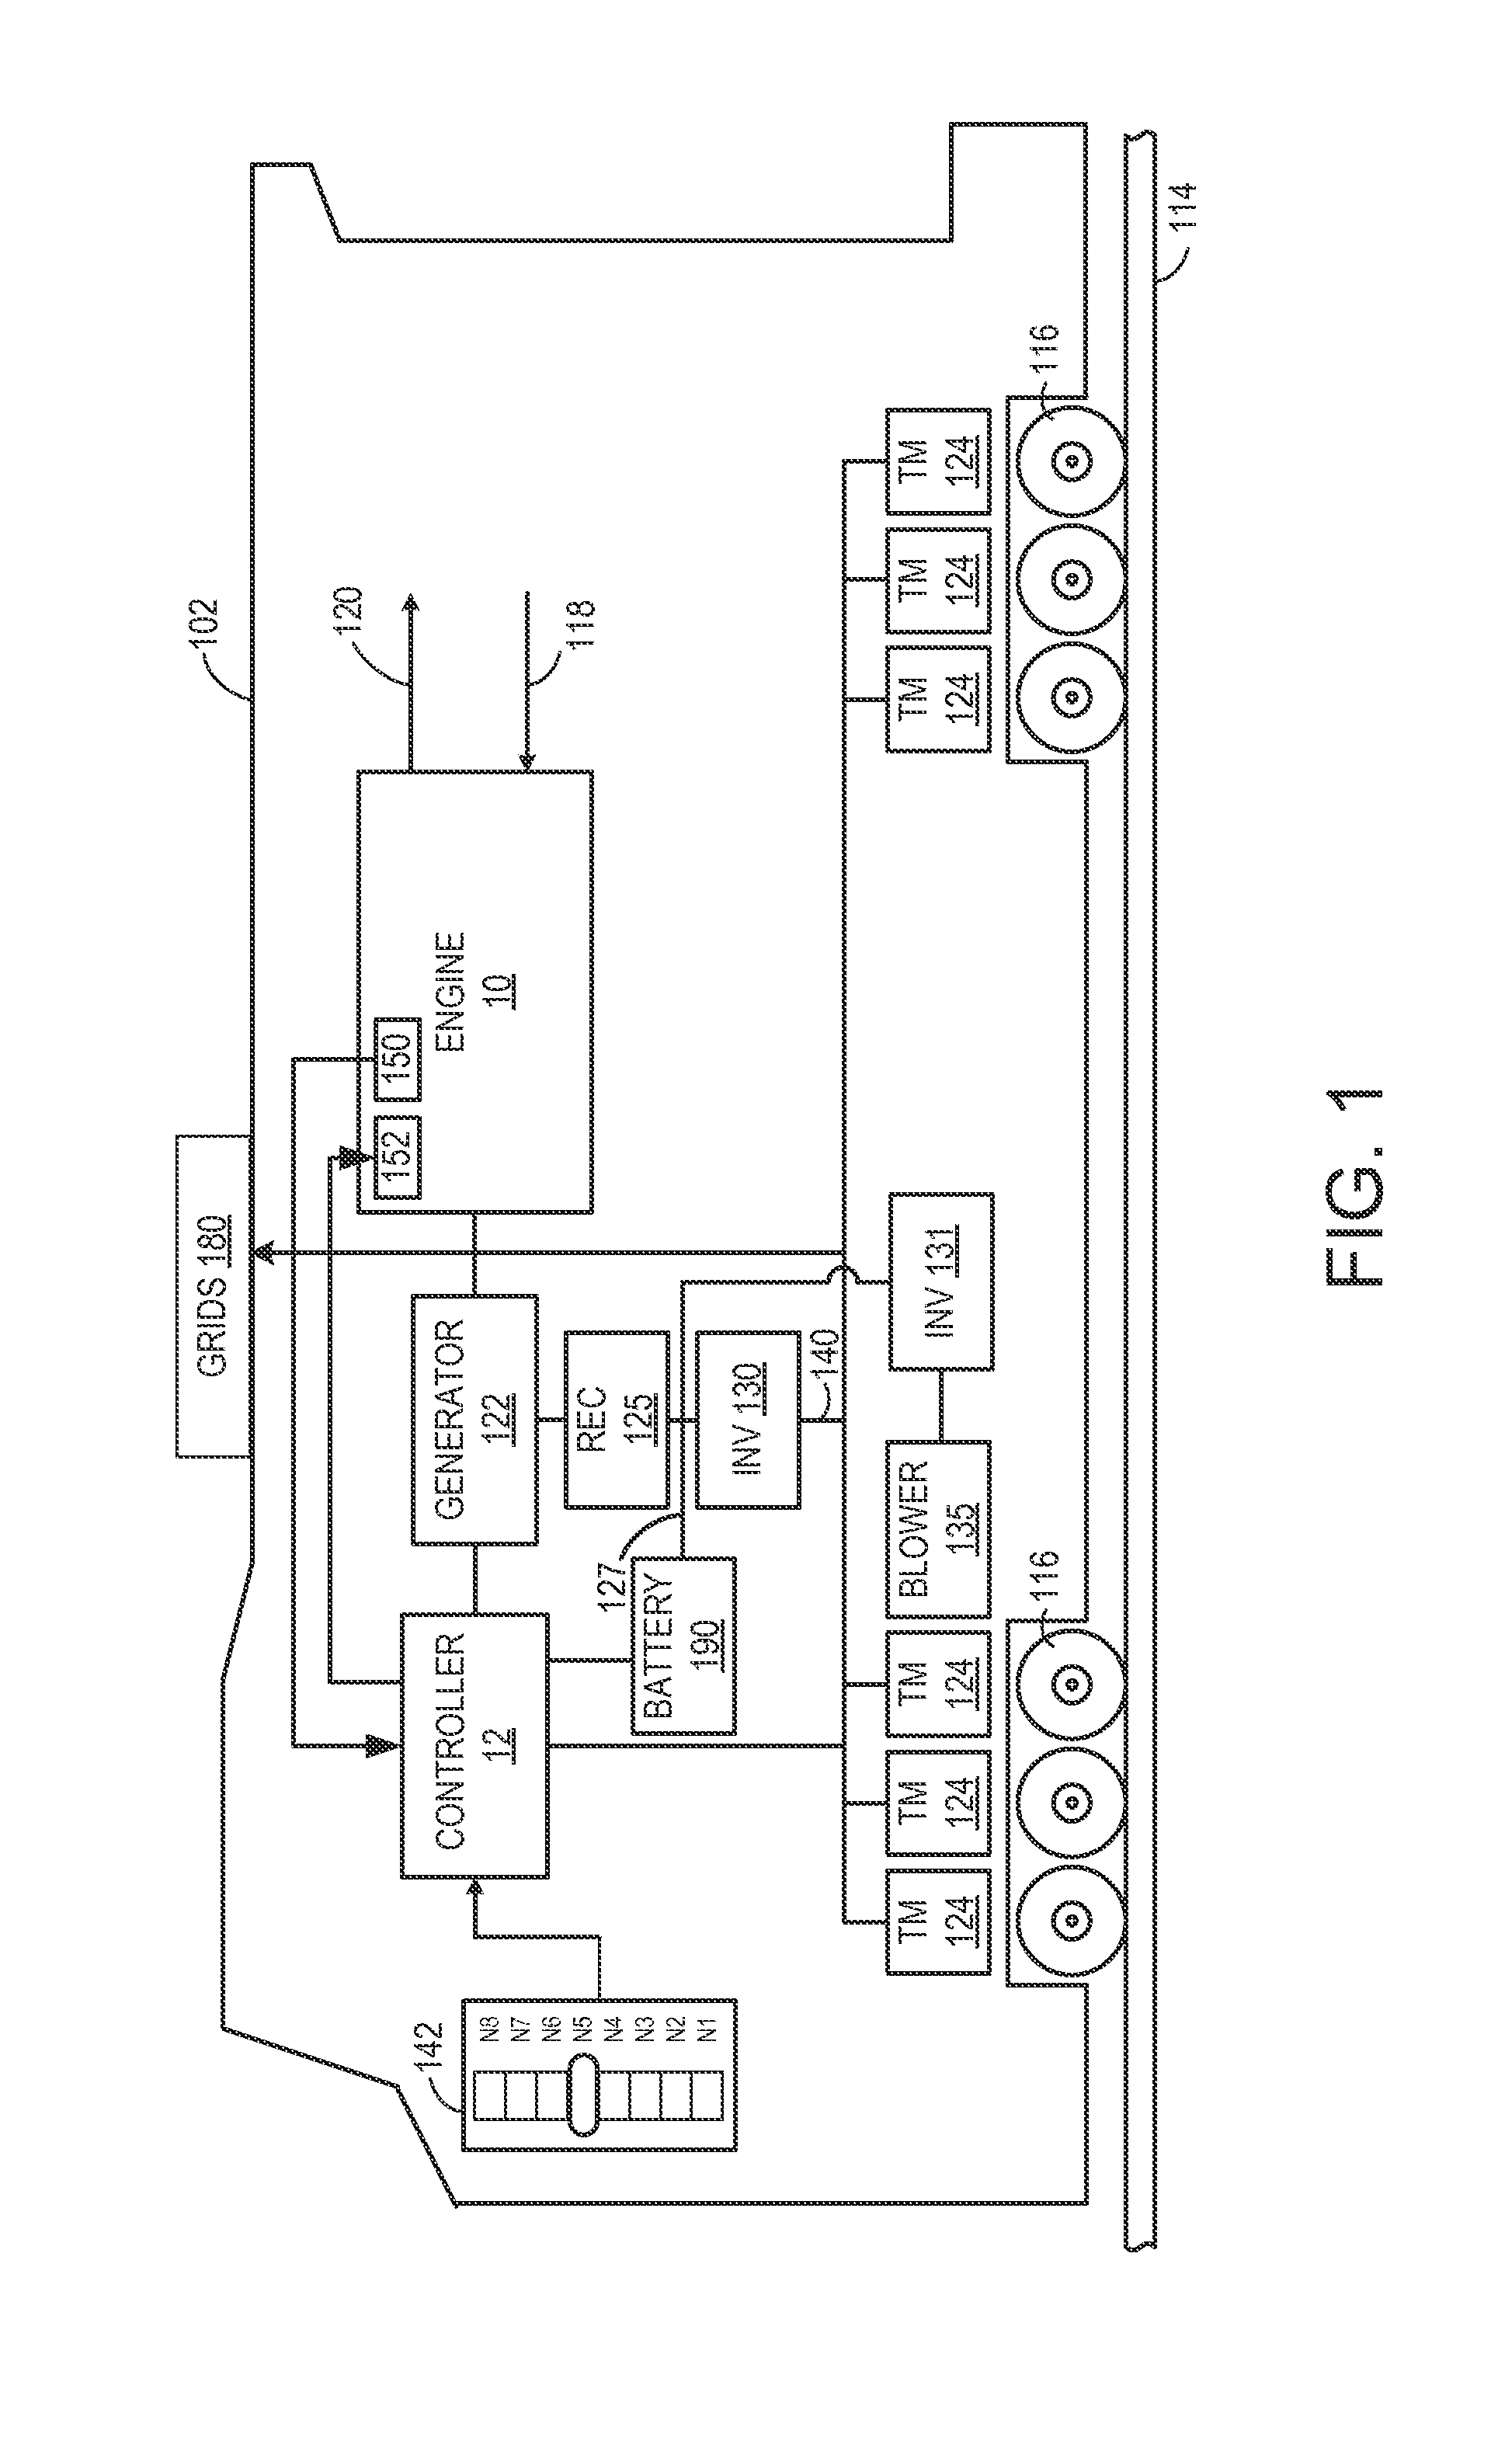 Method and system for motor thermal protection